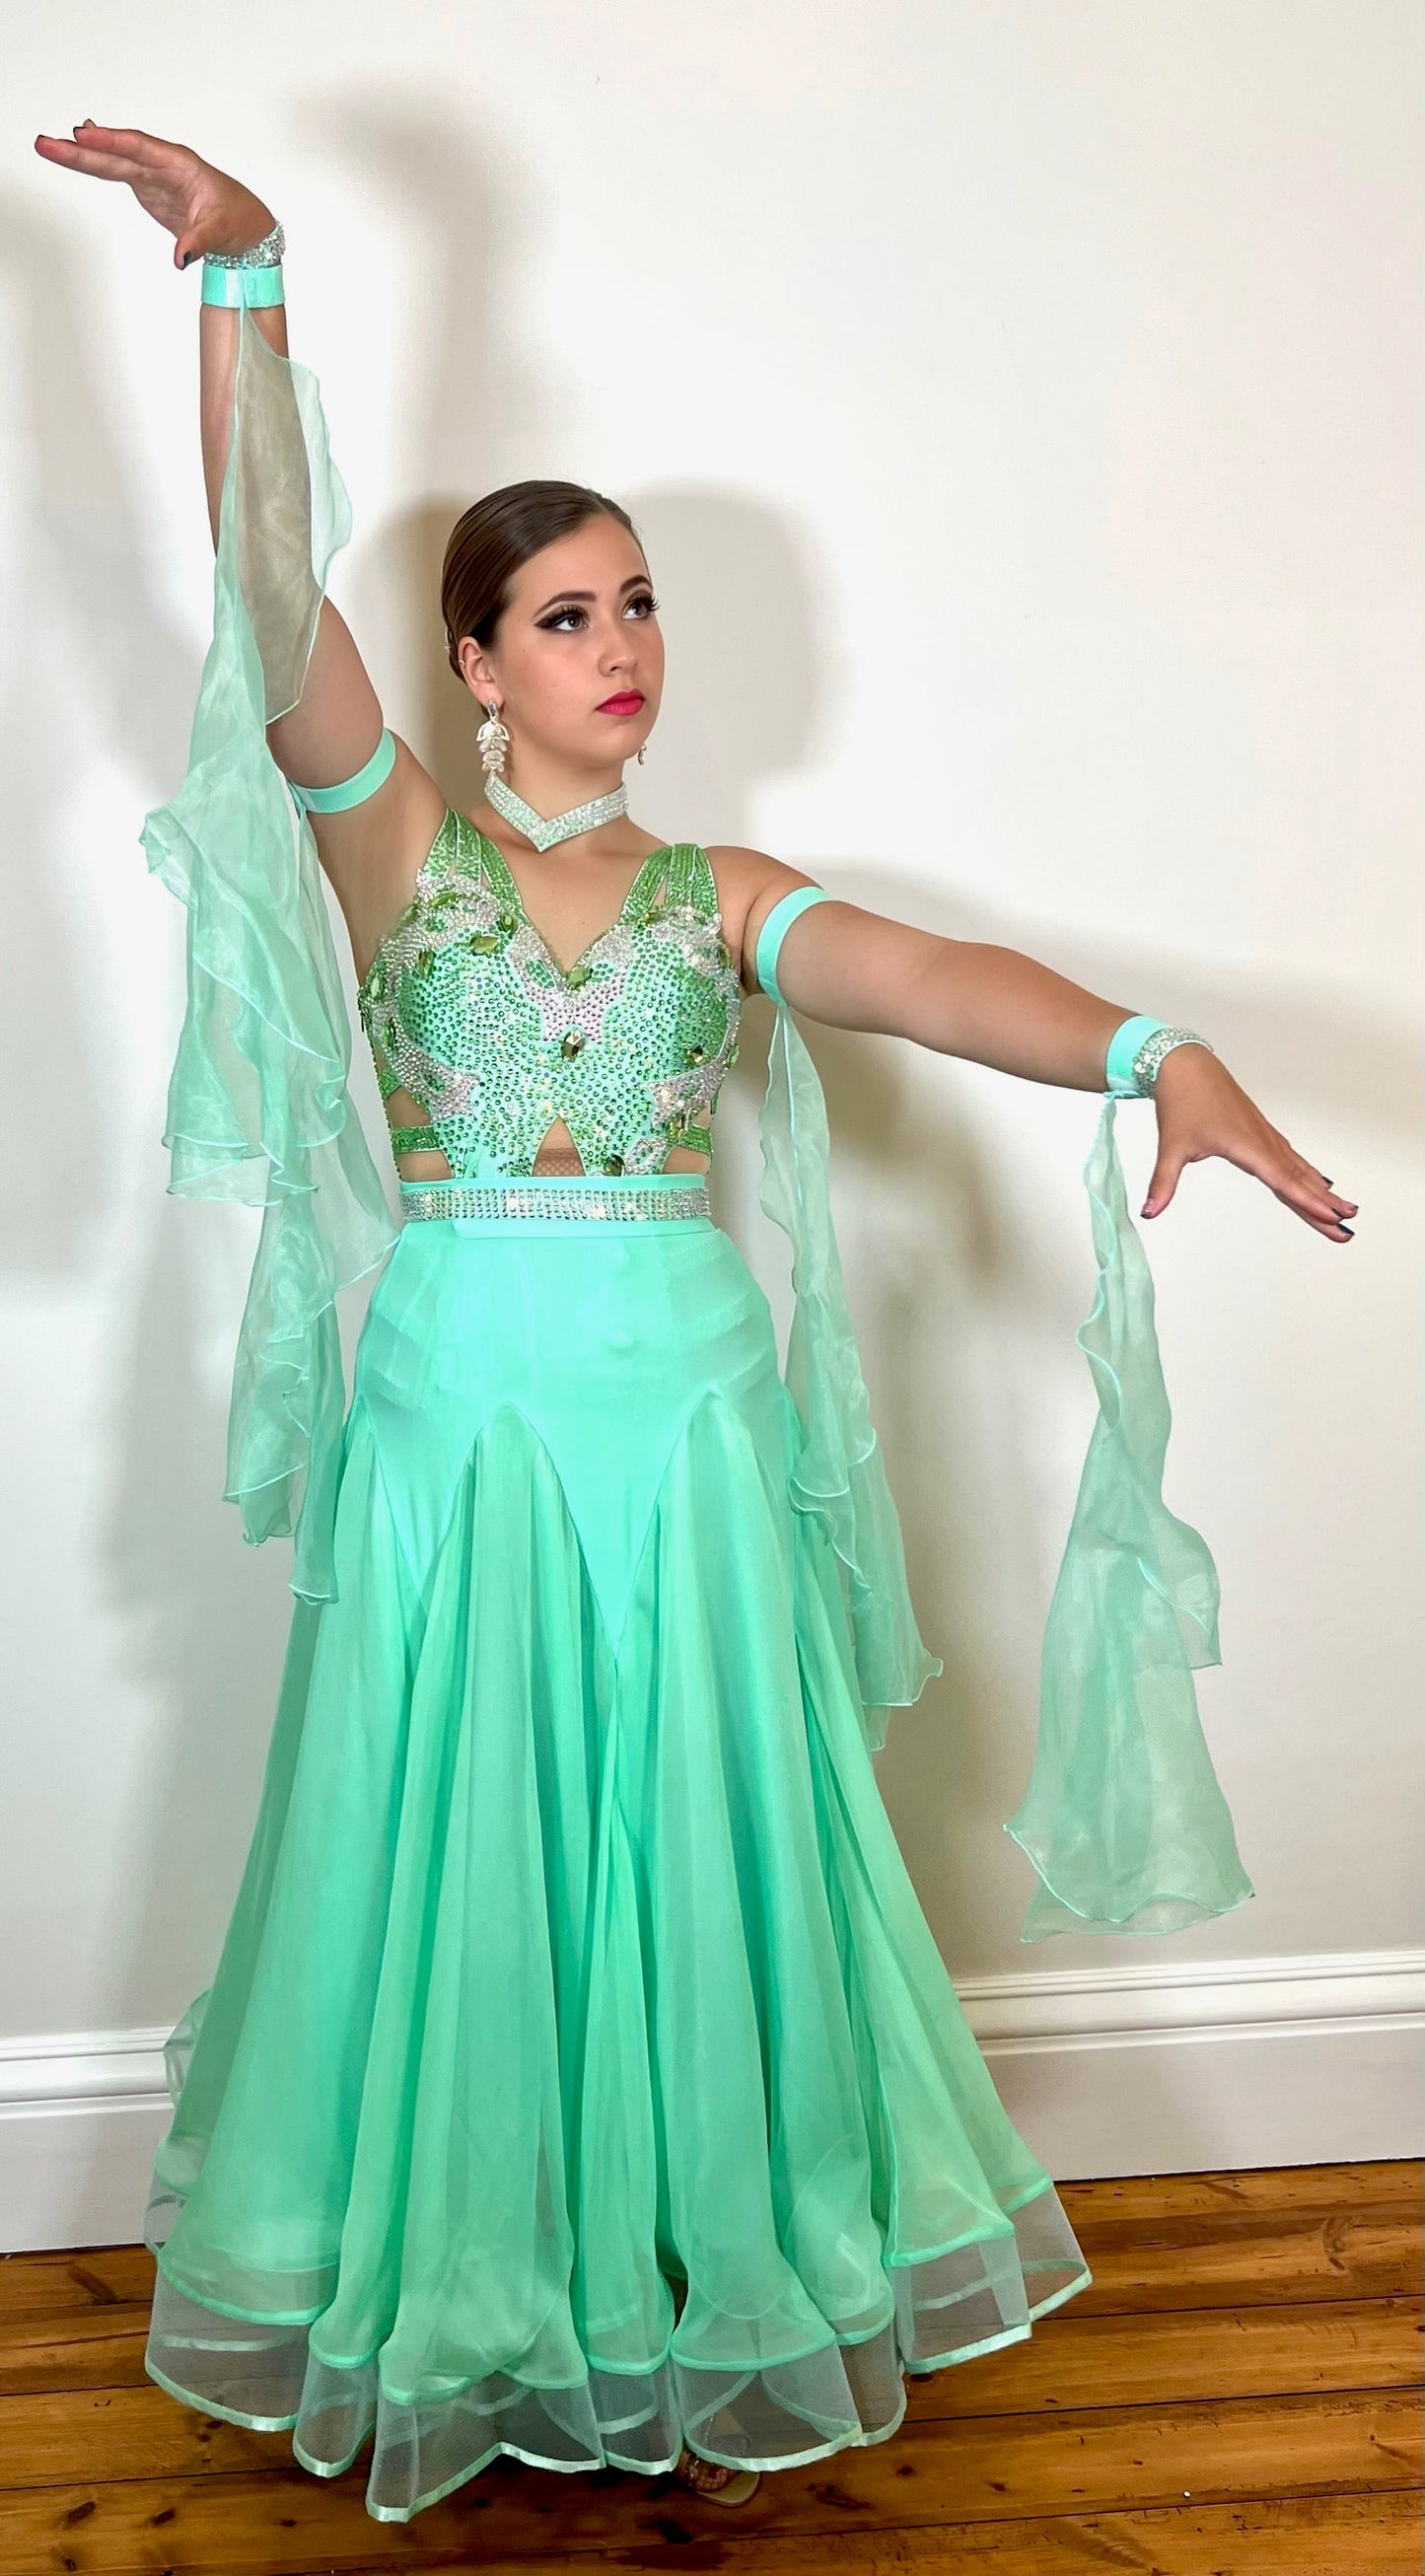 026 Mint Green Latin Dress with a Ballroom Skirt, x4 floats on bands & AB stoned belt. Latin dress with full material fringe, white motifs & stoned in AB